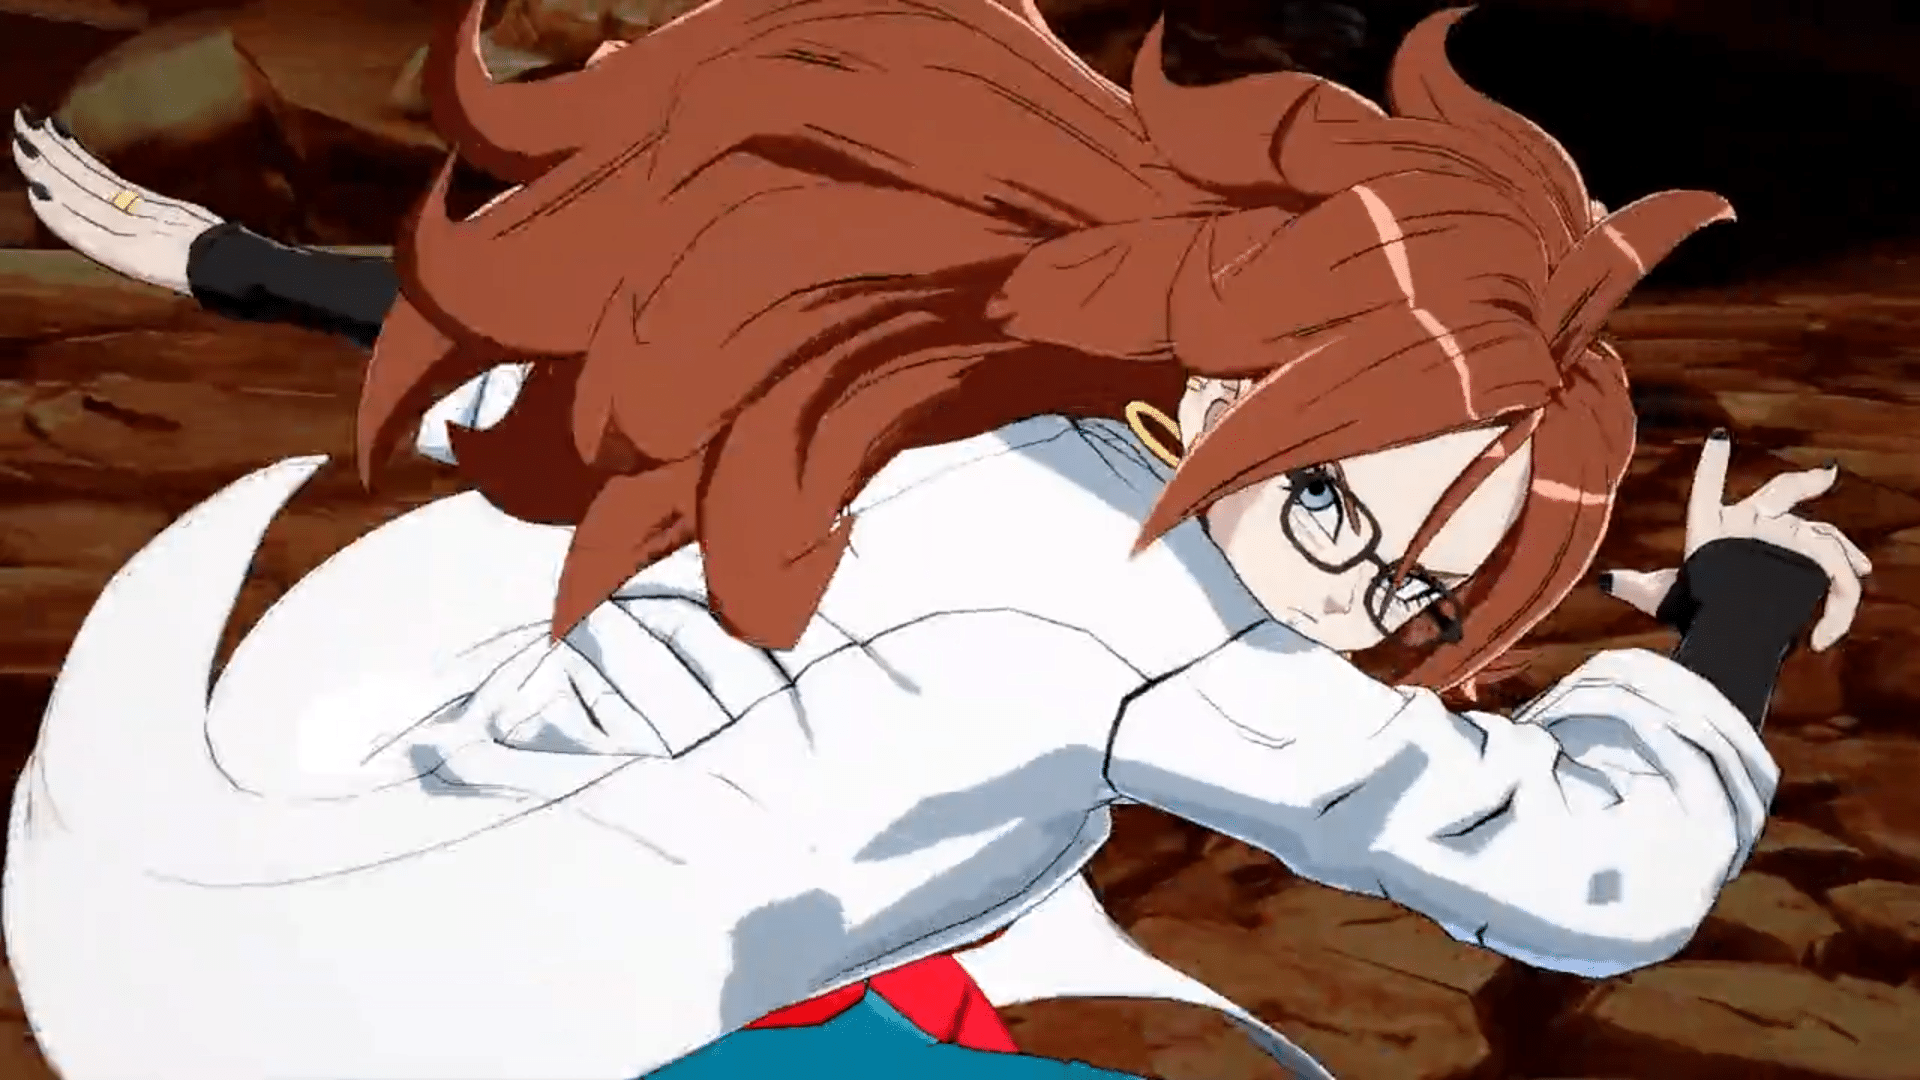 Android 21(Lab Coat) DLC Character Joining Dragon Ball FighterZ Next Week